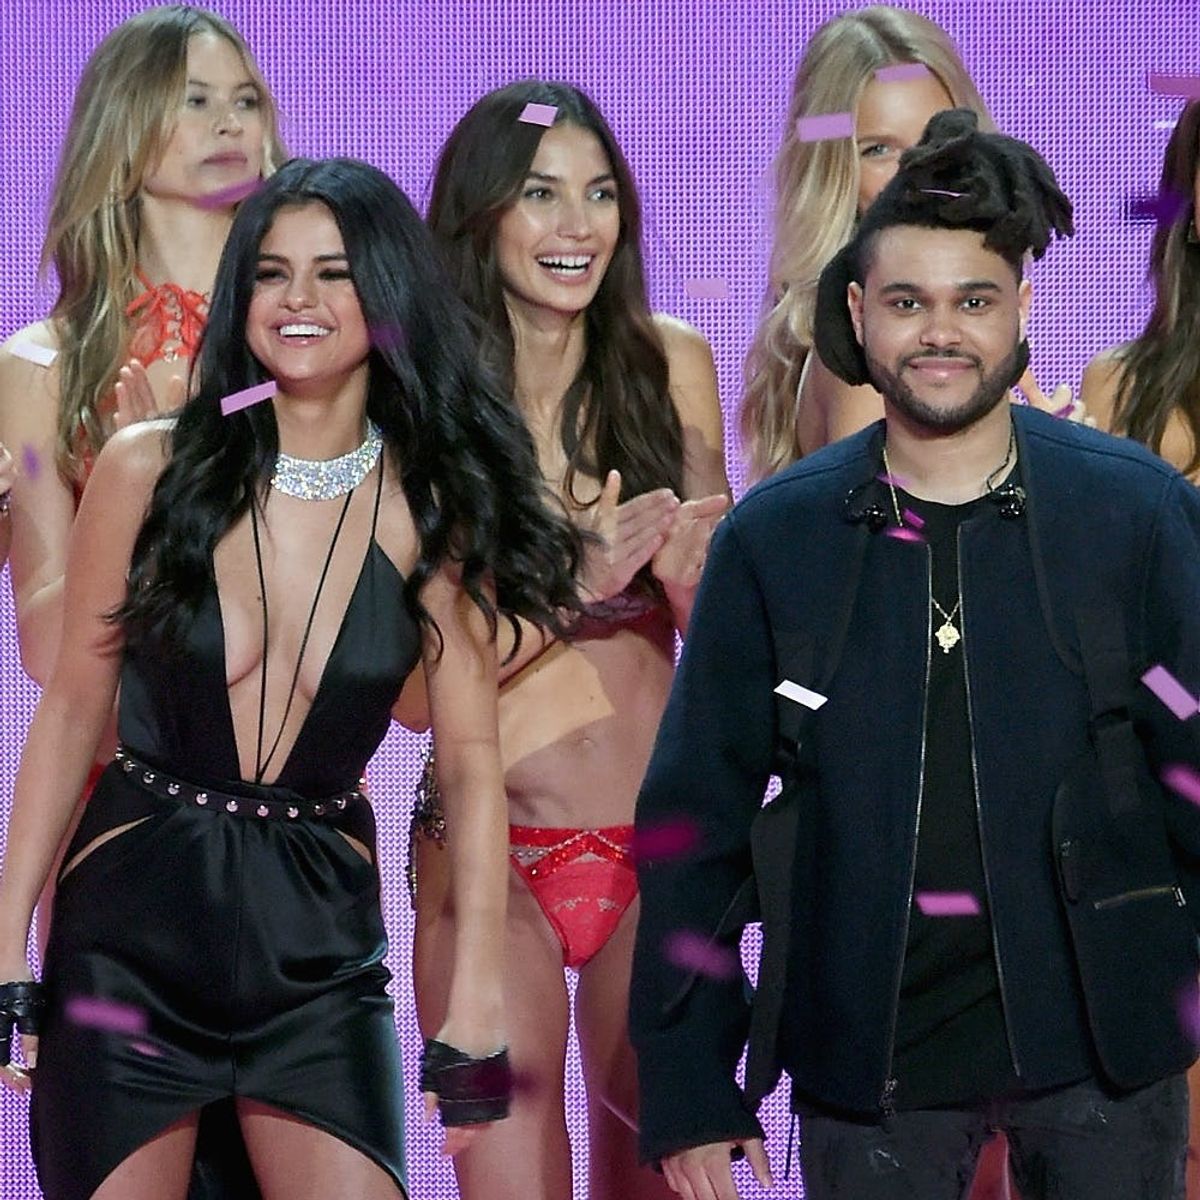 Selena Gomez and The Weeknd Are in the Running for Cutest Coachella Couple